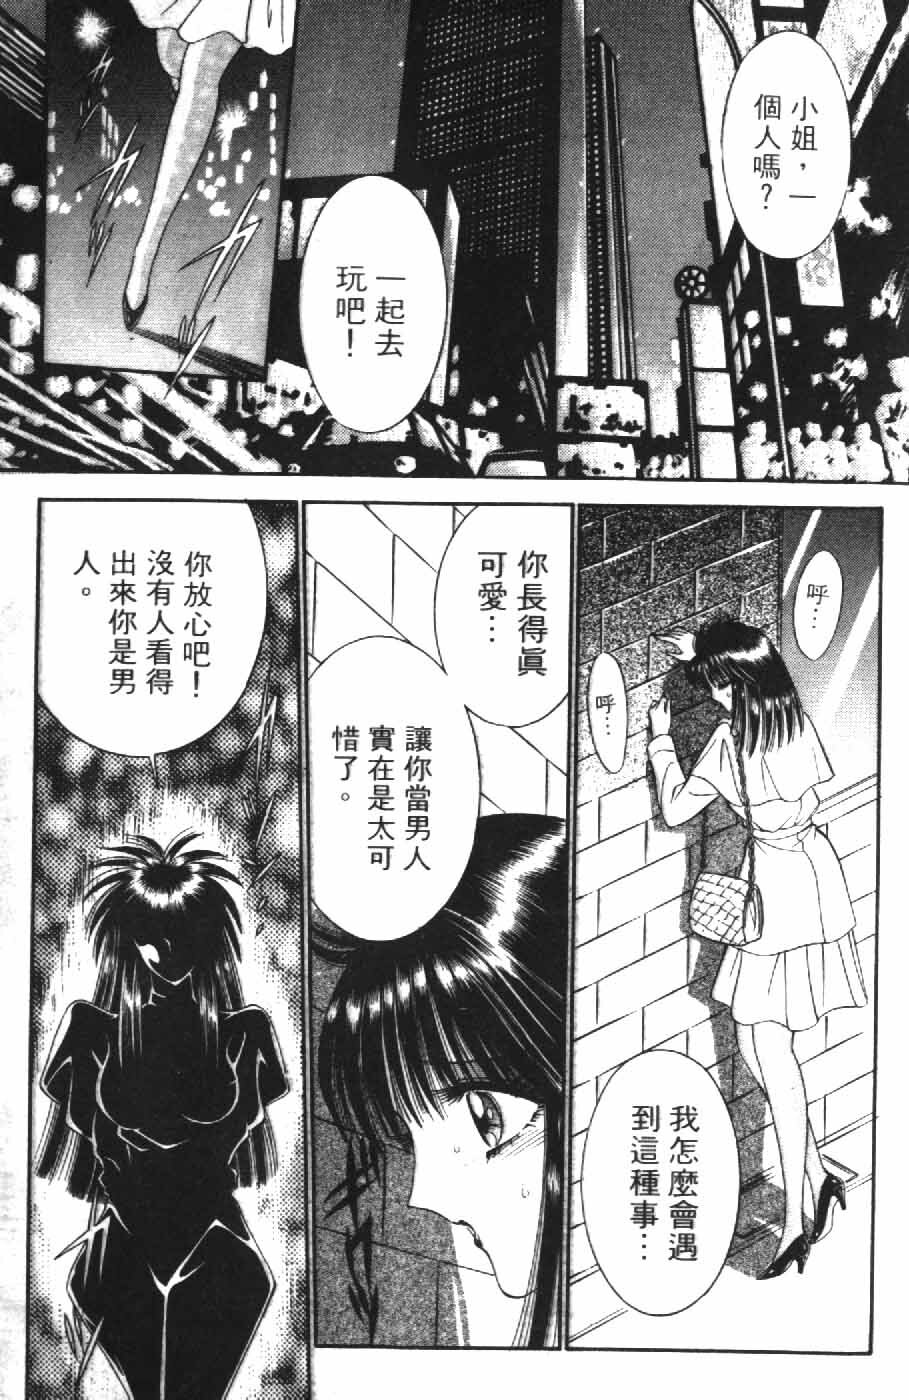 [Senno Knife] Ouma ga Horror Show 2 - Trans Sexual Special Show 2 | 顫慄博覽會 2 [Chinese] page 5 full